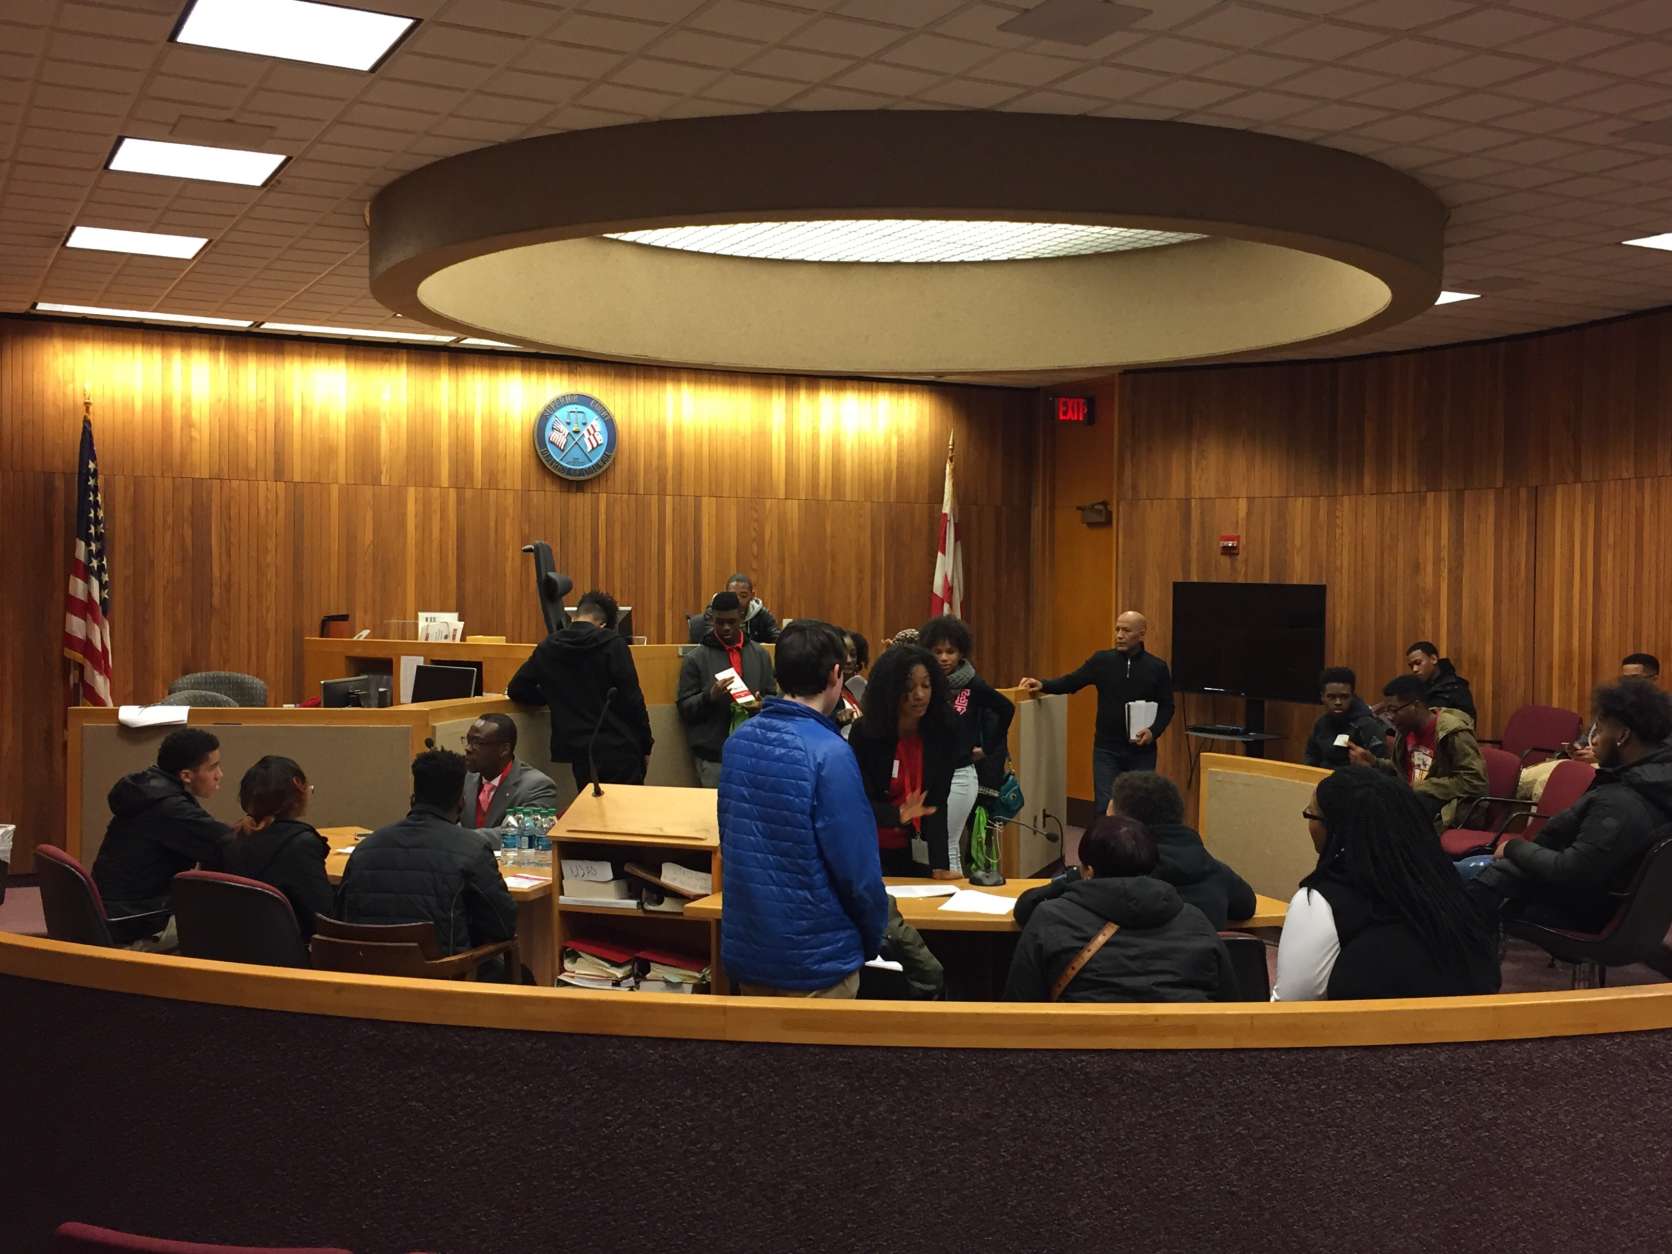 Students had an up close look at the legal system as part of the annual DC Youth Law Fair. Hosted by the DC Bar Association, the fair is a chance for kids to see a courtroom and holding cells and meet with judges on friendlier terms. (WTOP/John Domen)